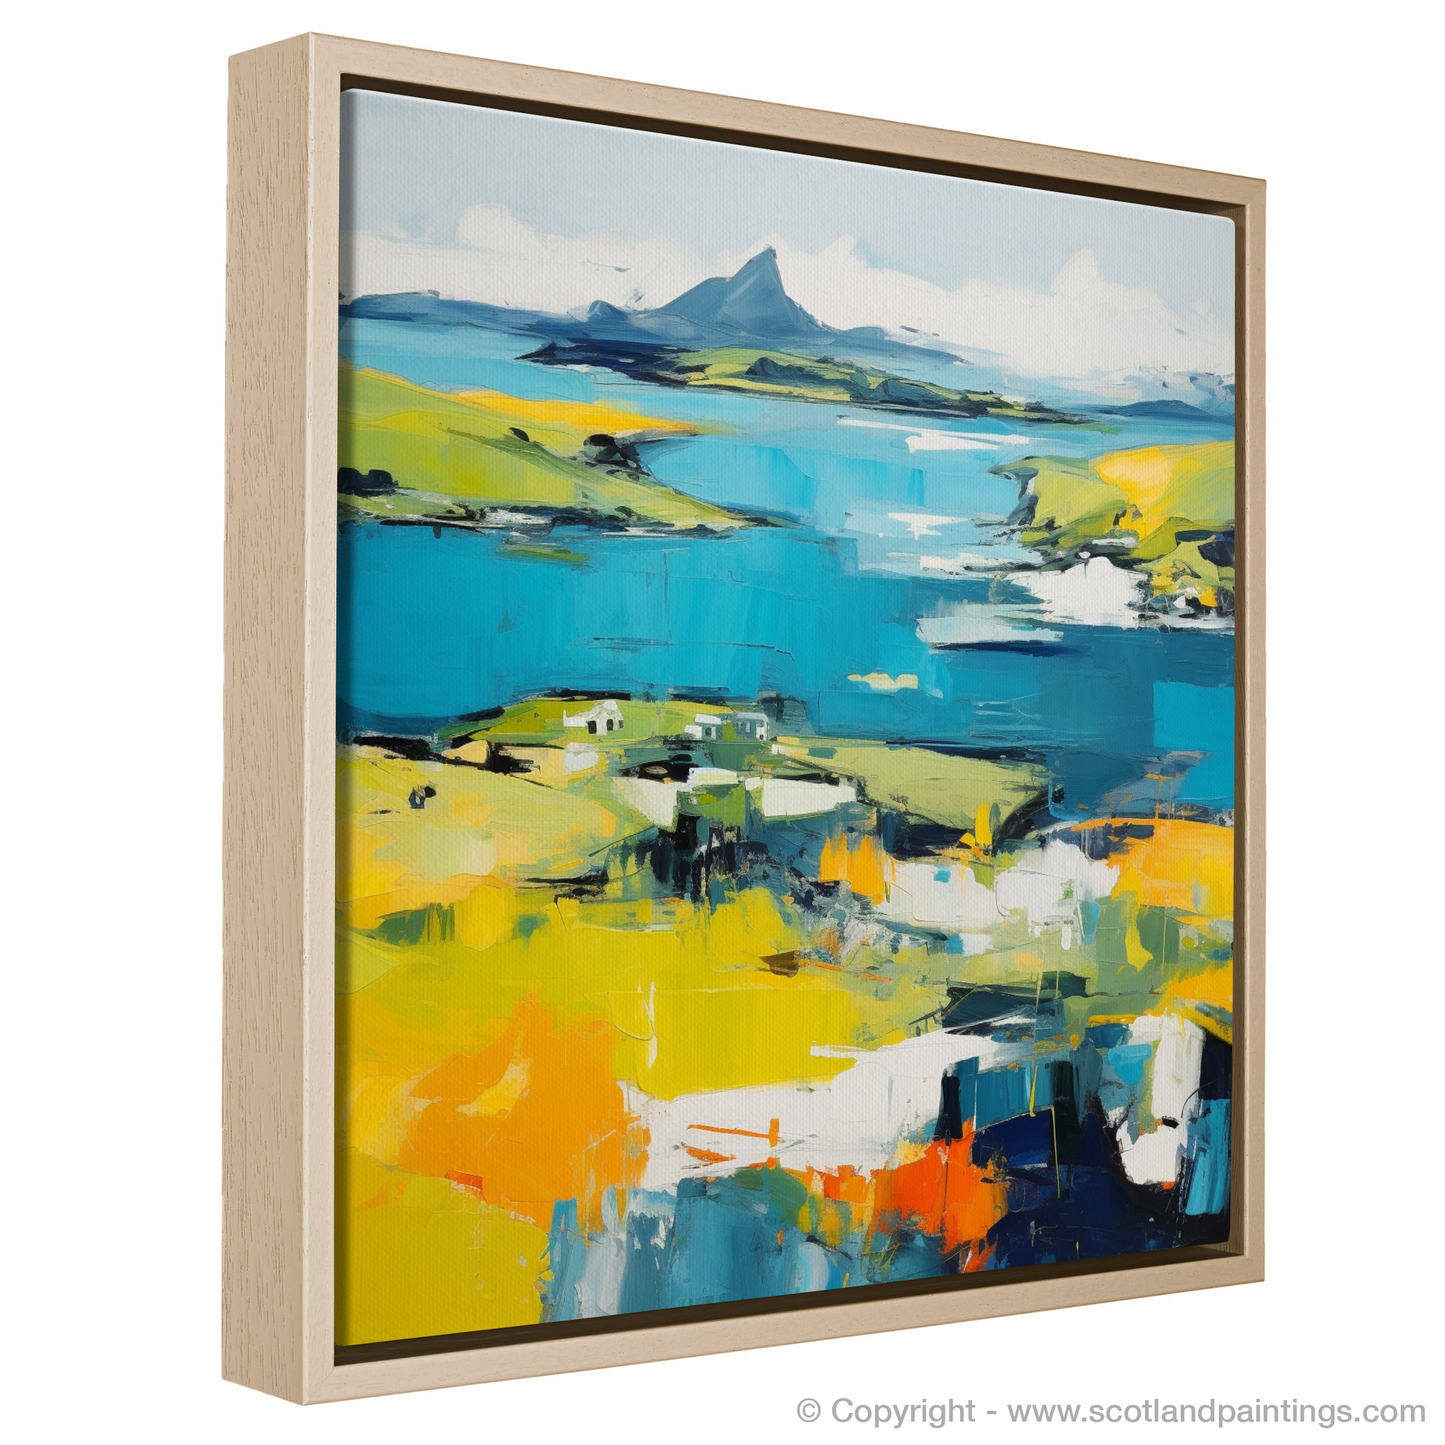 Painting and Art Print of Isle of Ulva, Inner Hebrides in summer entitled "Summer Symphony of Ulva".